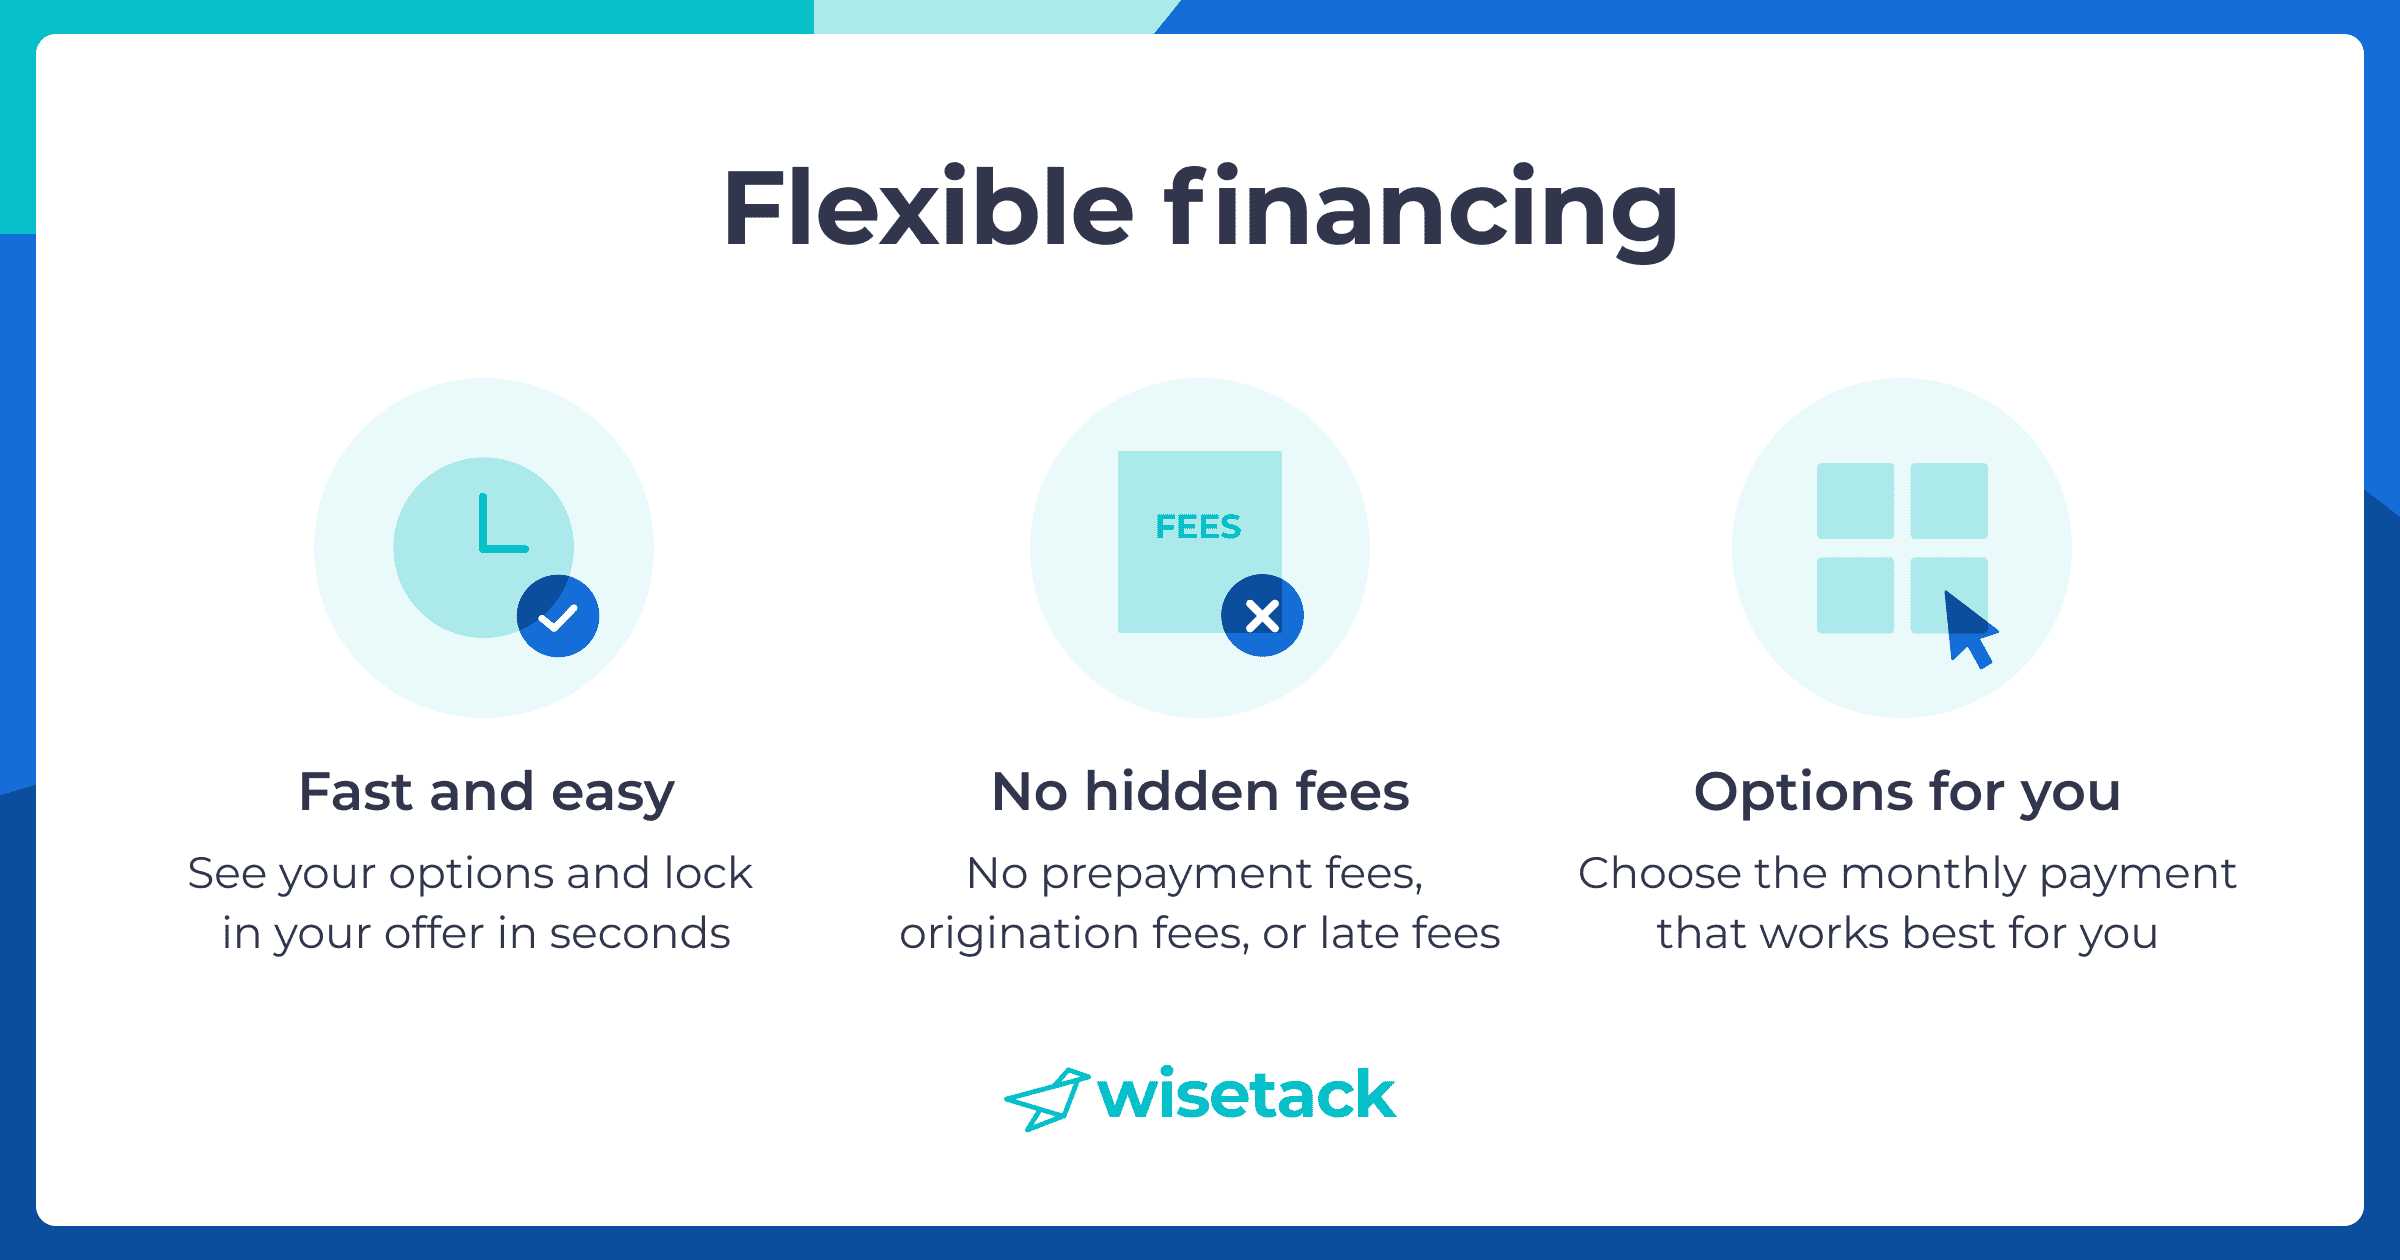 Image with the text 'Flexible Financing' and descriptions of fast and easy options, no hidden fees, and options for choosing monthly payments